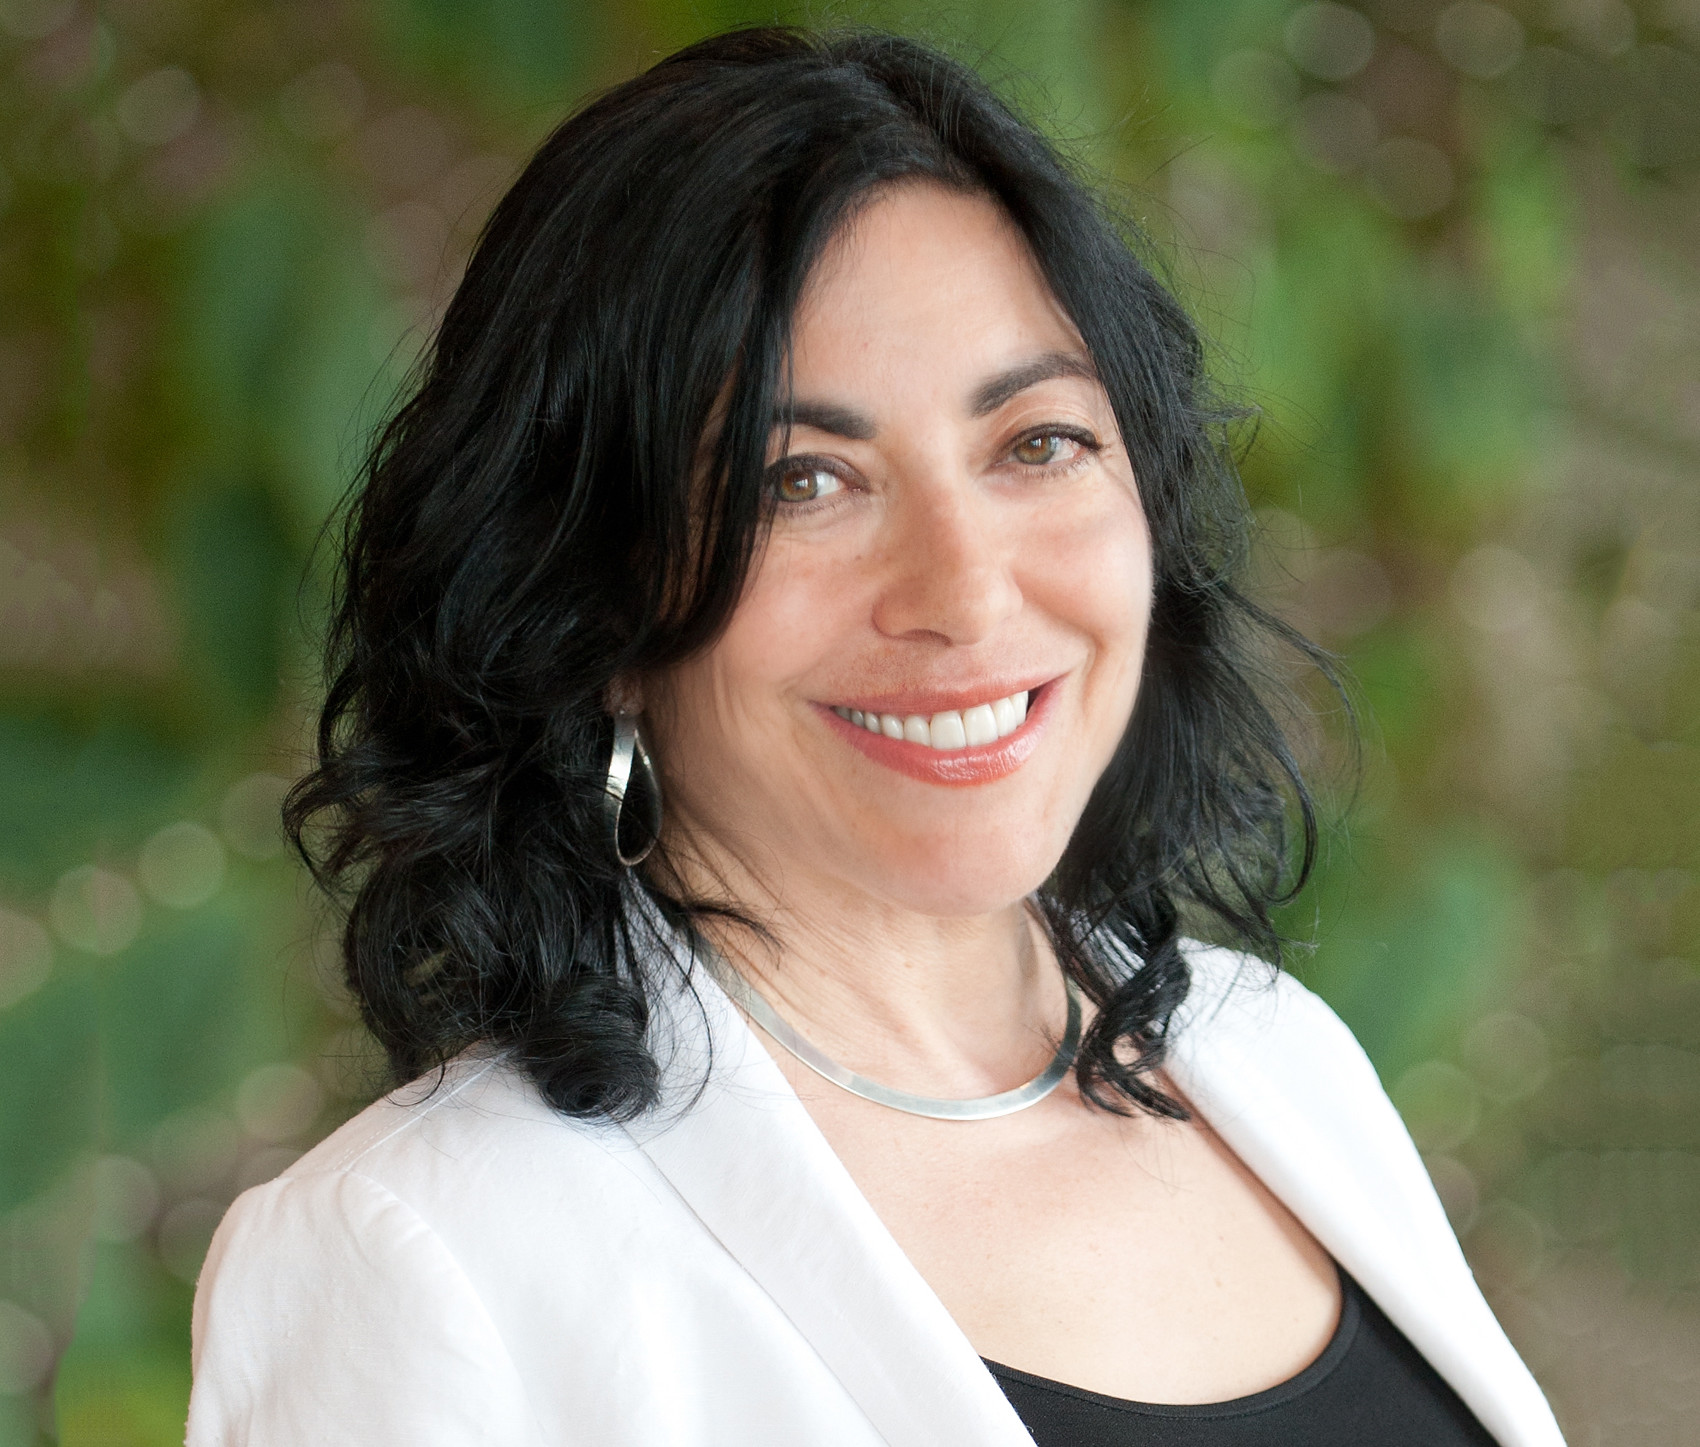 Microsoft Data Scientist Jennifer Chayes ’78 Elected to National Academy of Sciences